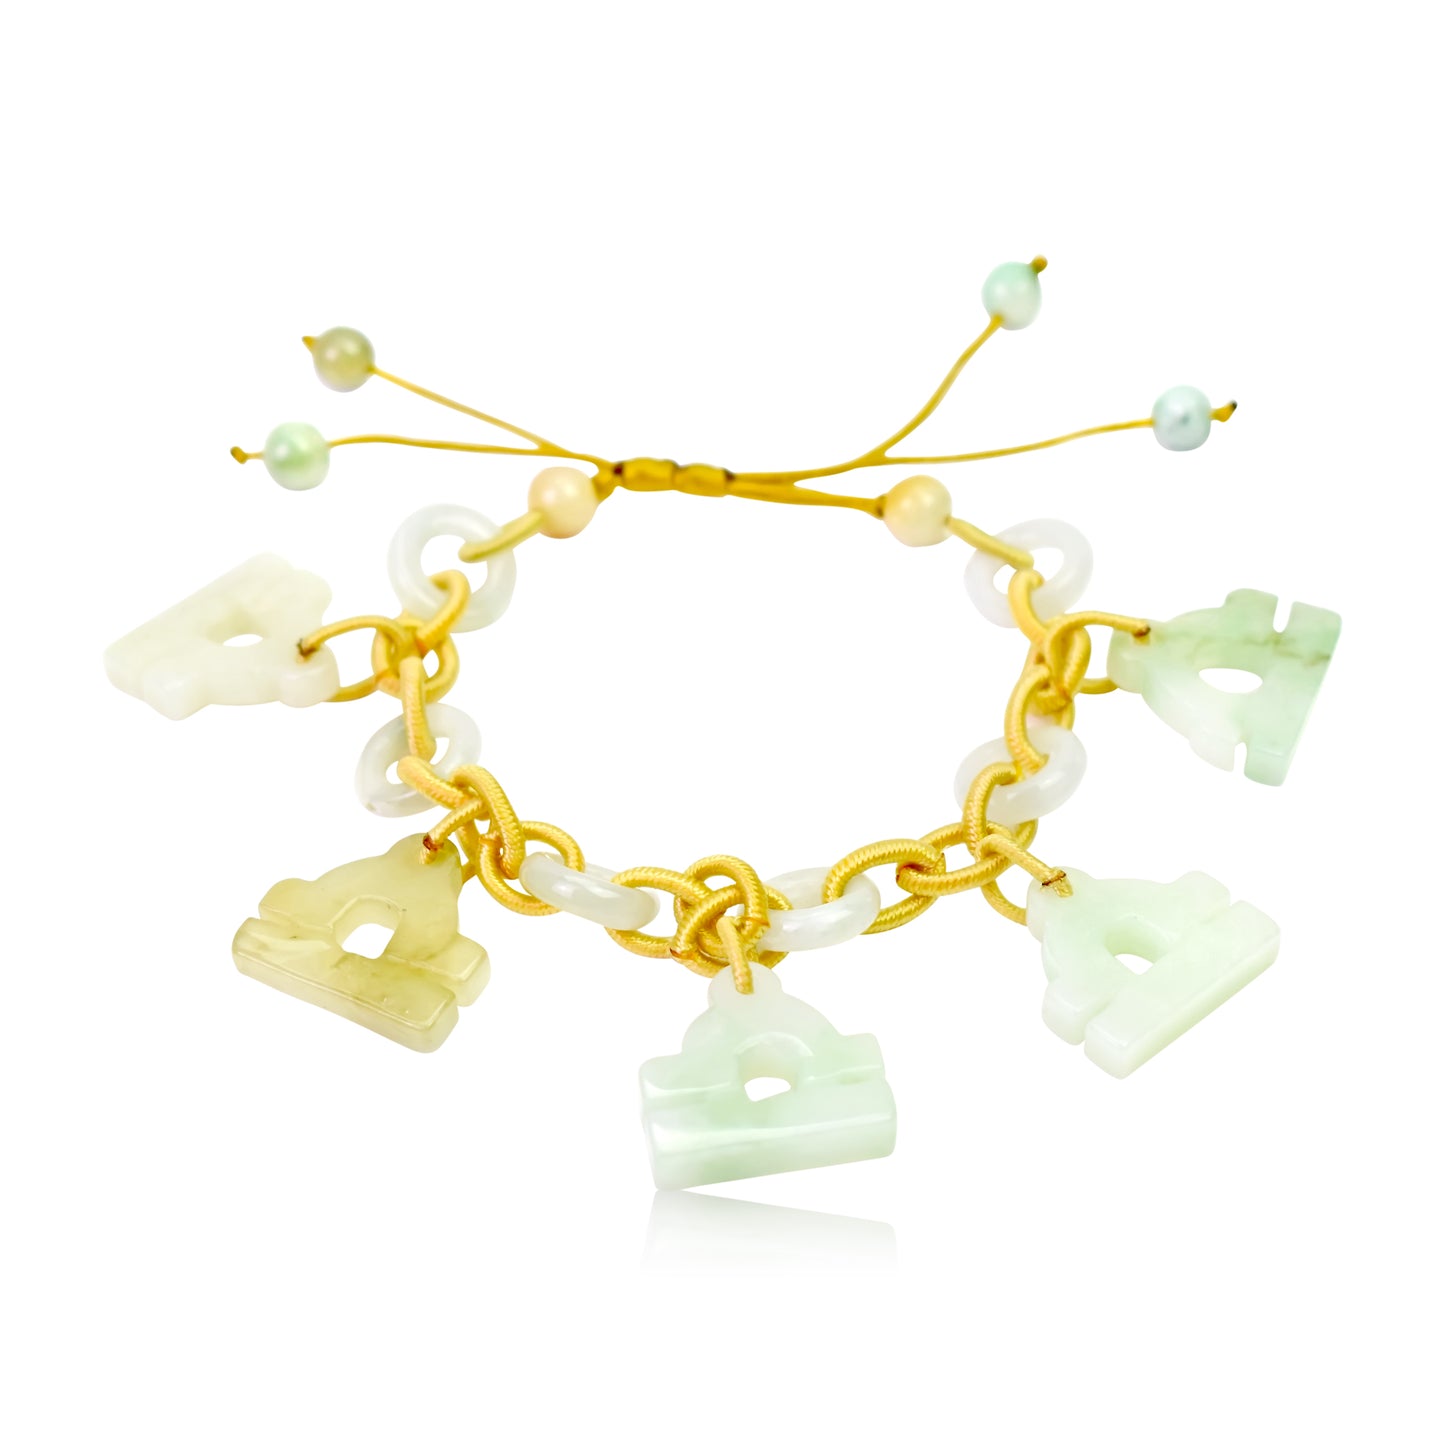 Symbolize your Libra Pride with a Handmade Jade Bracelet made with Yellow Cord